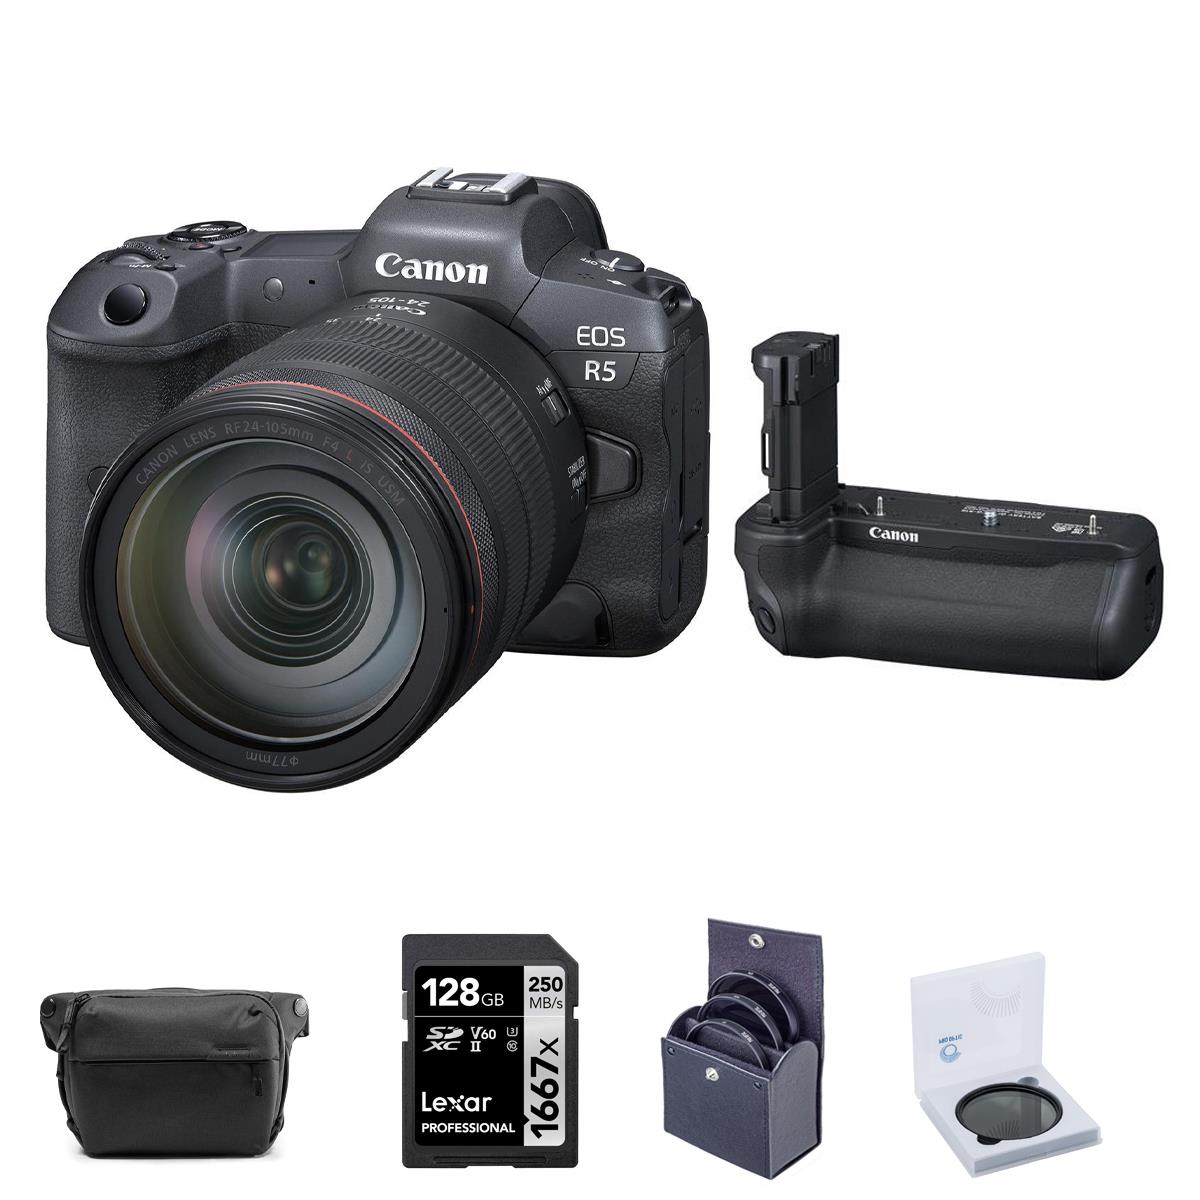 Canon EOS R5 Mirrorless Camera with RF 24-105mm f/4L Lens, with Battery Grip Kit